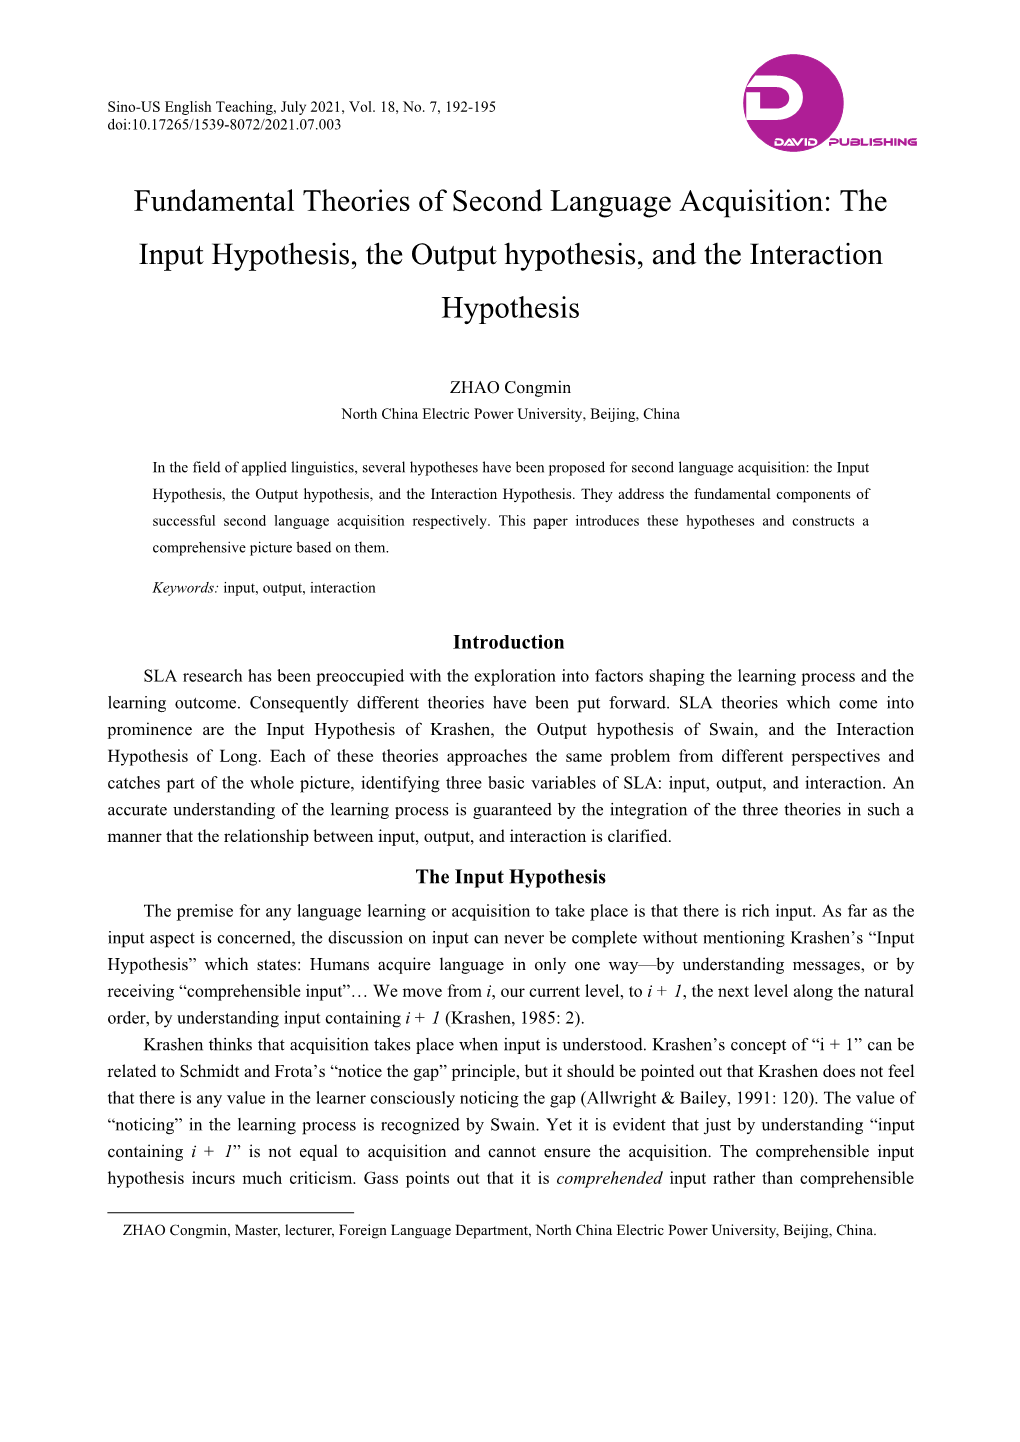 Fundamental Theories of Second Language Acquisition: the Input Hypothesis, the Output Hypothesis, and the Interaction Hypothesis